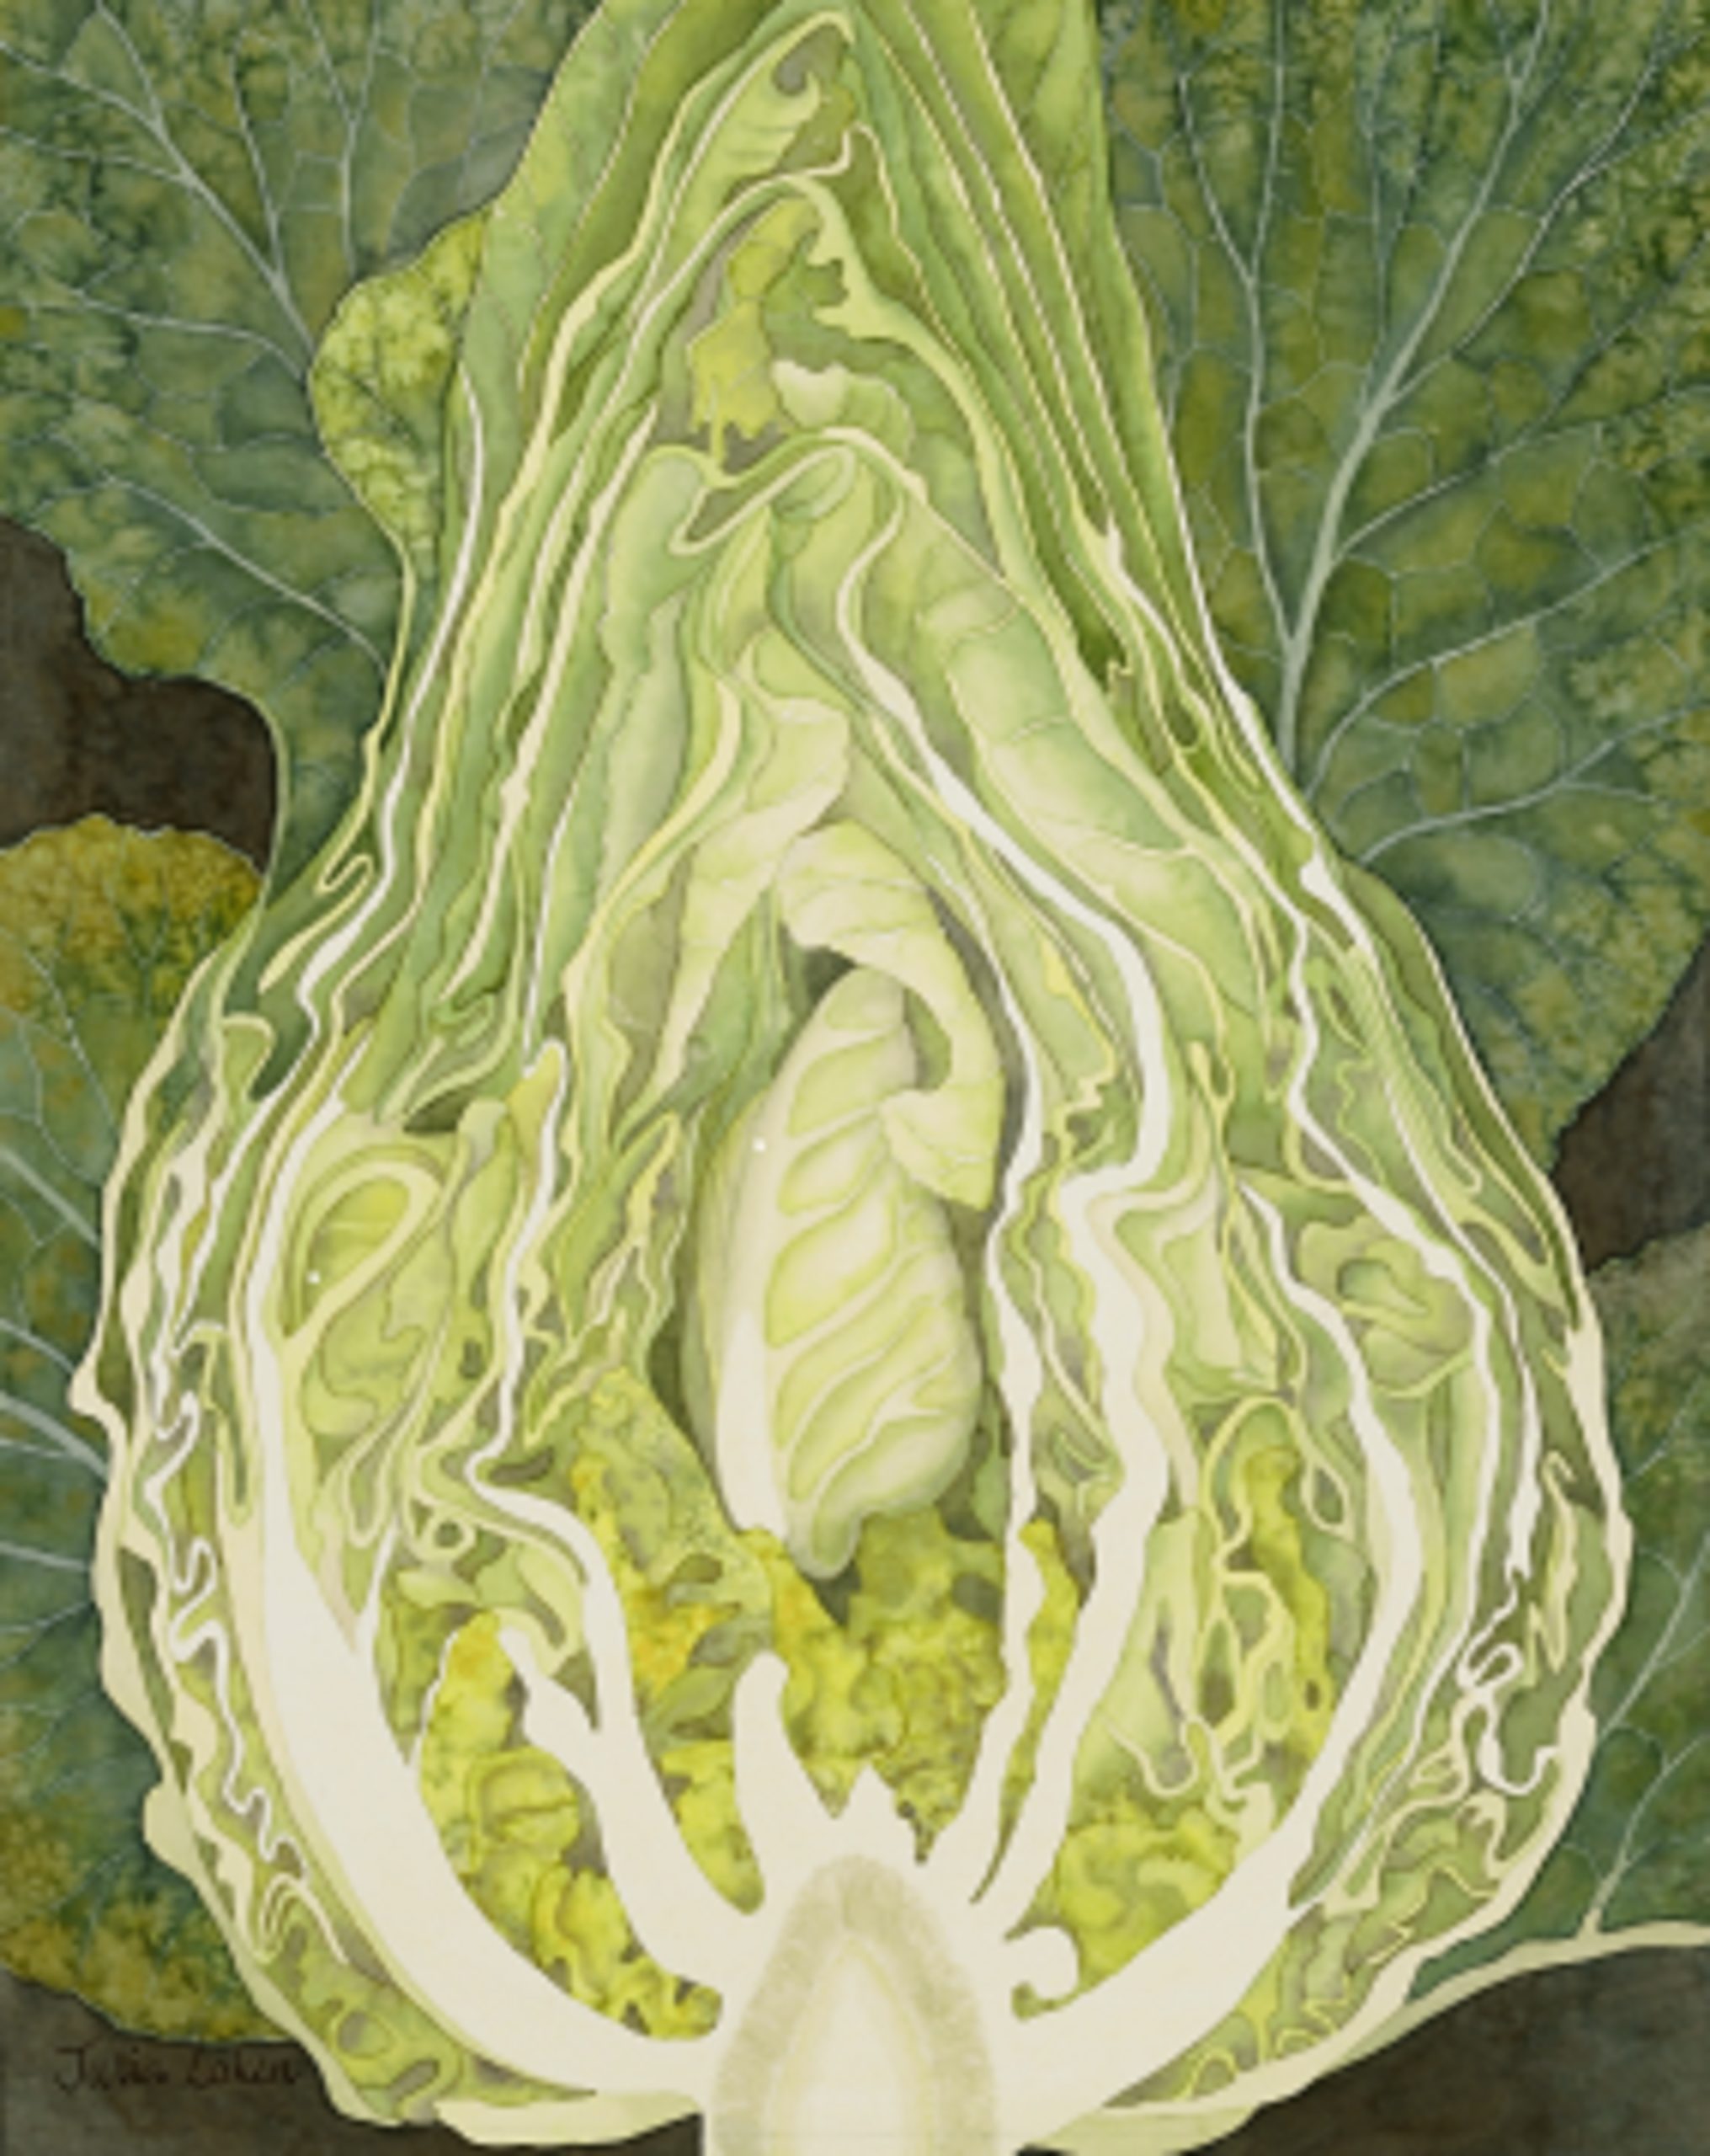 
		                					Julia Loken		                																	
																											<i>Spring Cabbage,</i>  
																																																					watercolor on paper, 
																																								15 1/2 x 12 1/2 inches 
																								
		                				